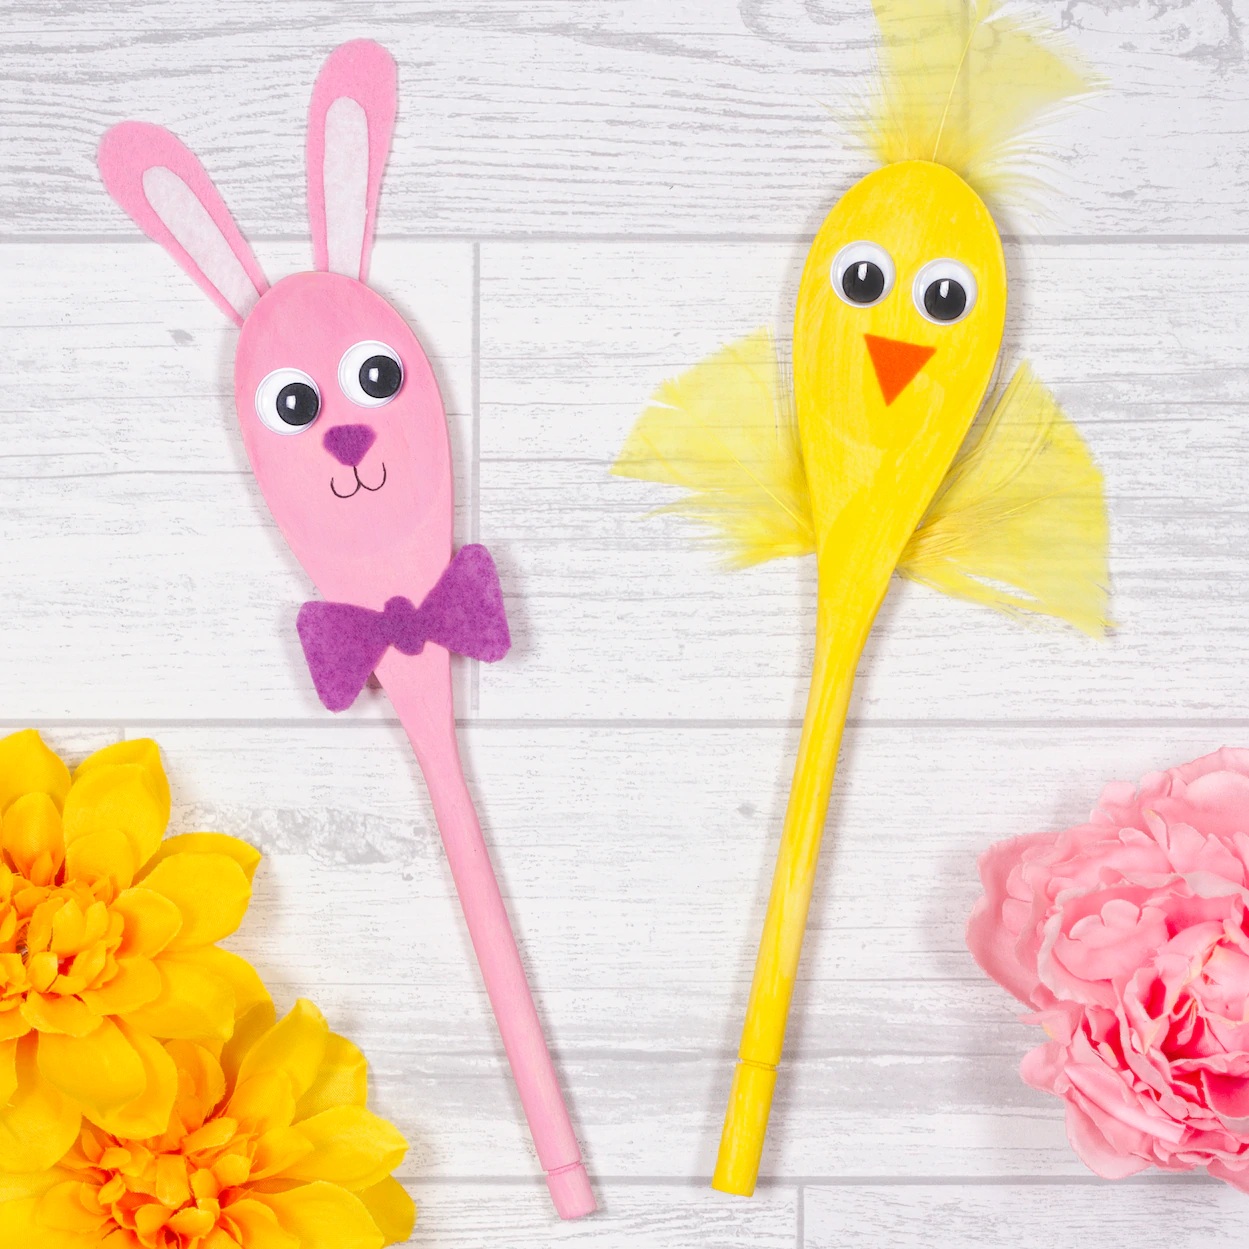 Wooden Spoon Puppets